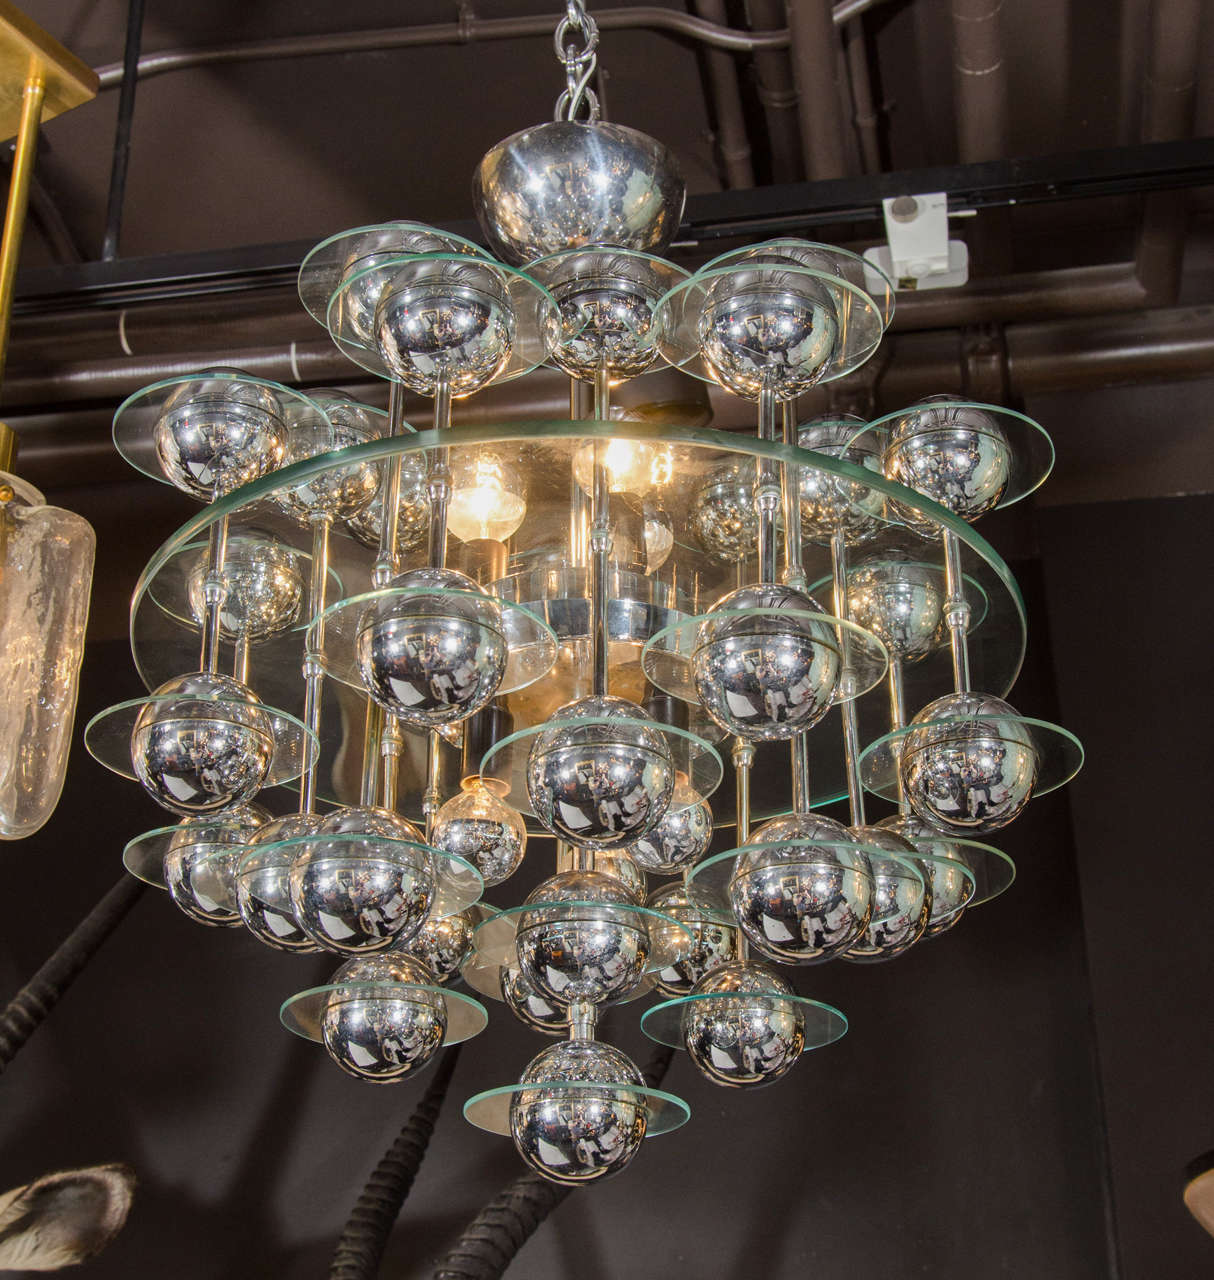 Italian Mid-Century Modern kinetic chandelier with Space Age design. Features central glass disc with suspended spheres of chrome globes. Each orb has a smaller glass disc surrounding it. The spheres hang from chrome rods attached through the center